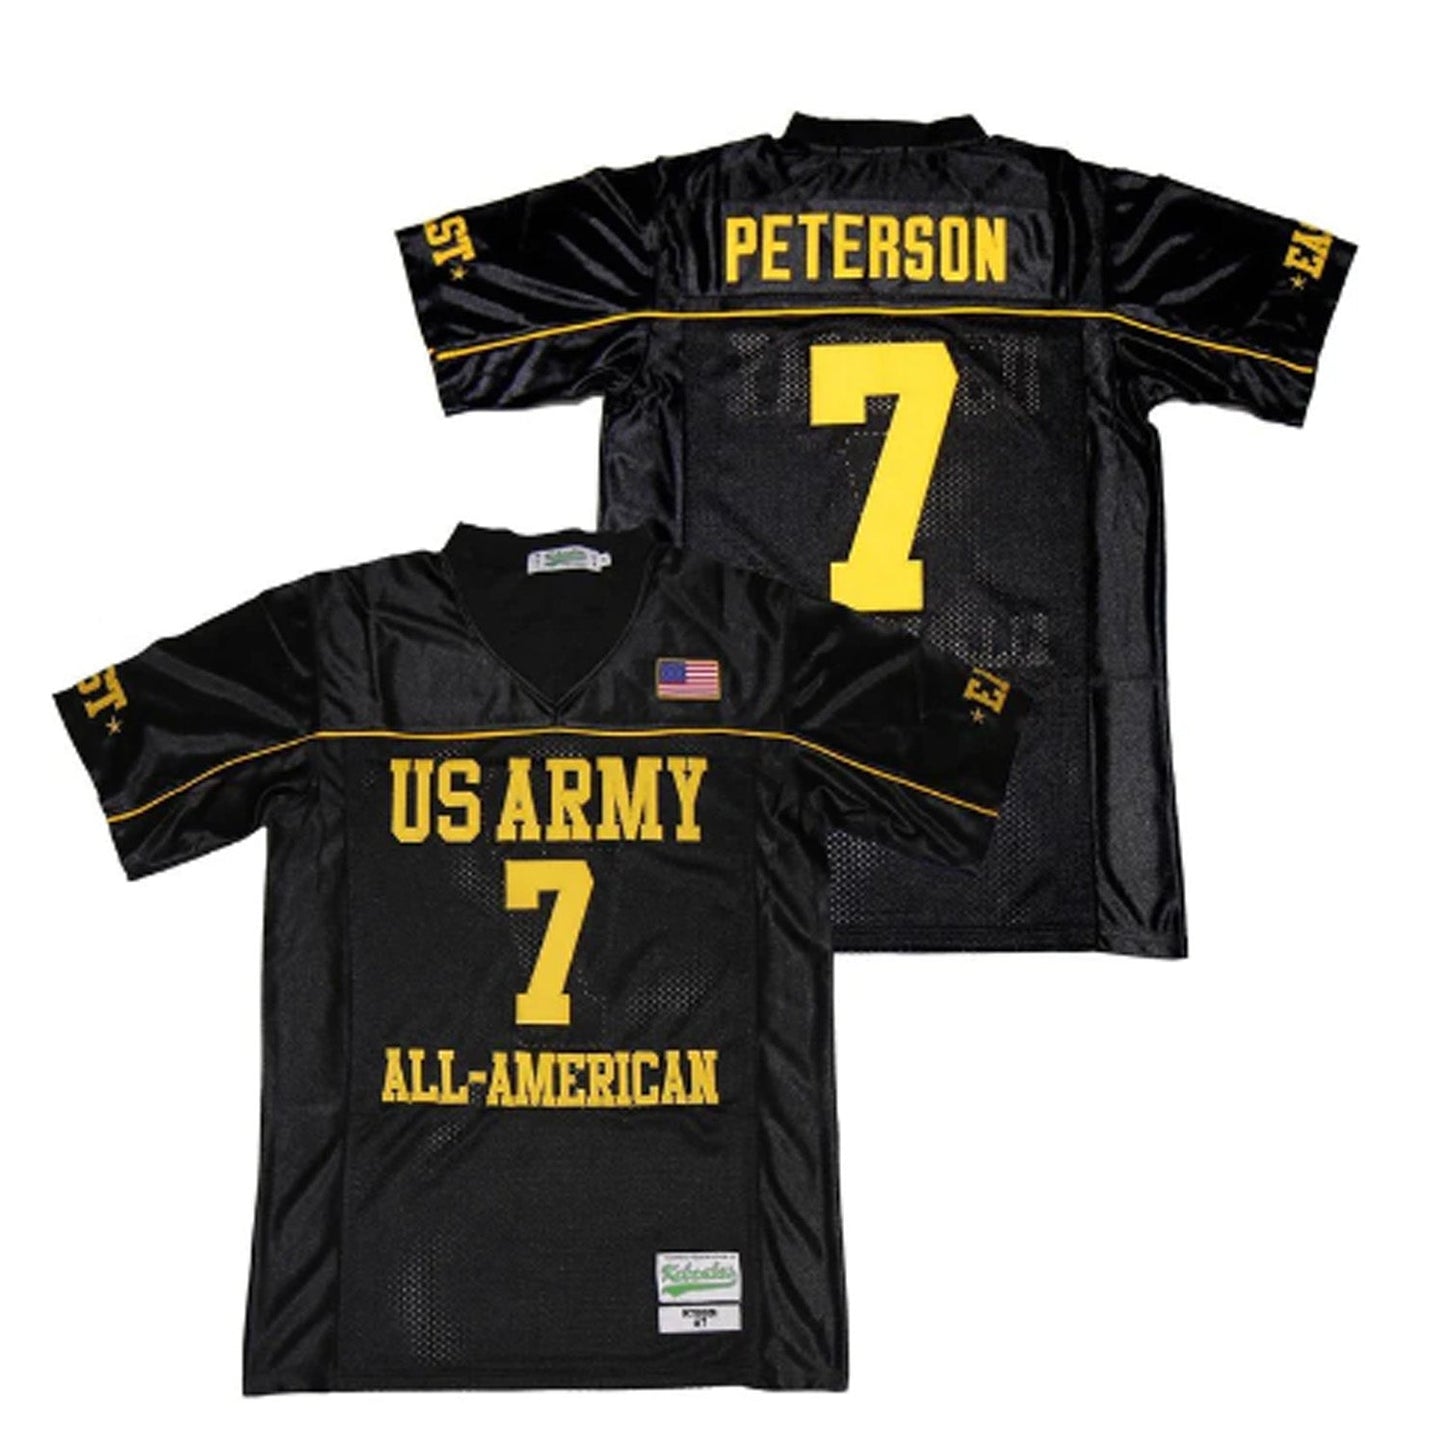 Adrian Peterson U.S. Army All-American Football 7 Jersey